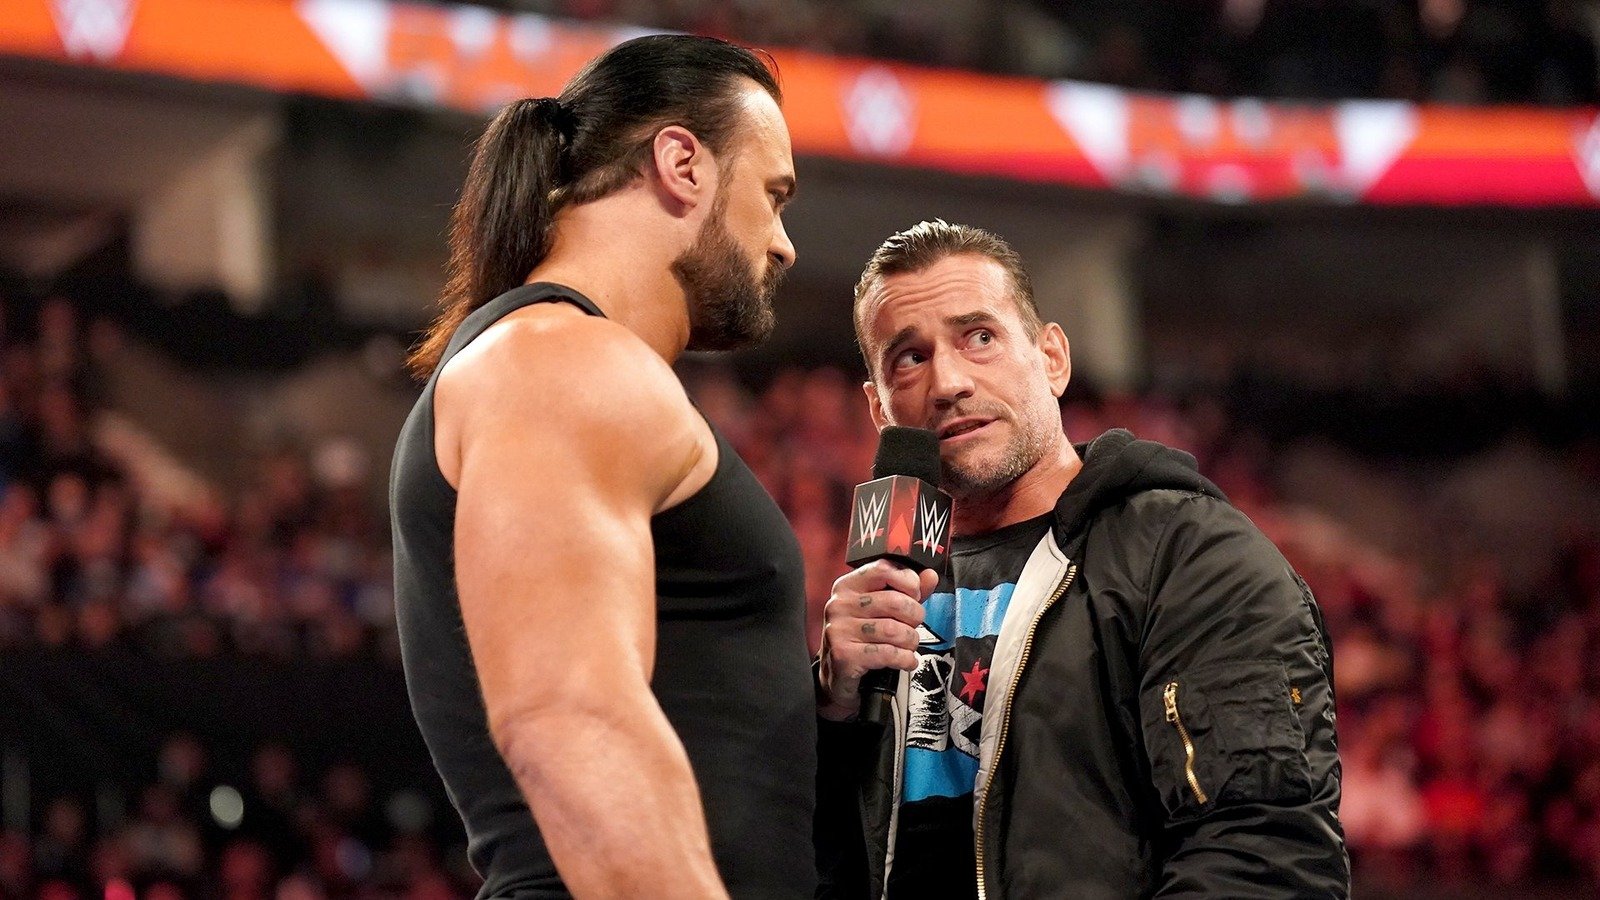 The Significance of Drew McIntyre vs. CM Punk Match Without the World Title